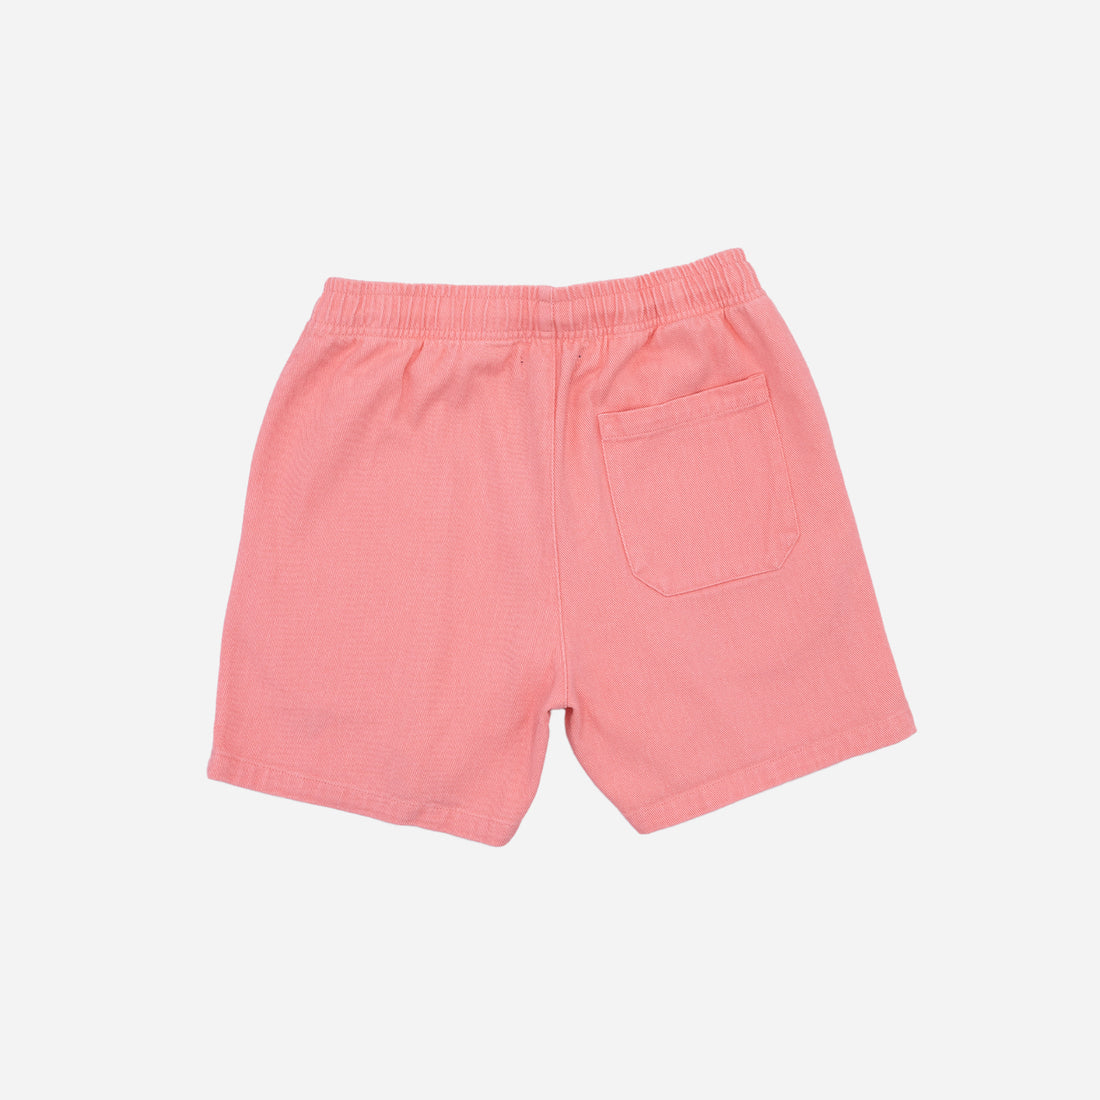 5" Woven Gym Shorts in Pink